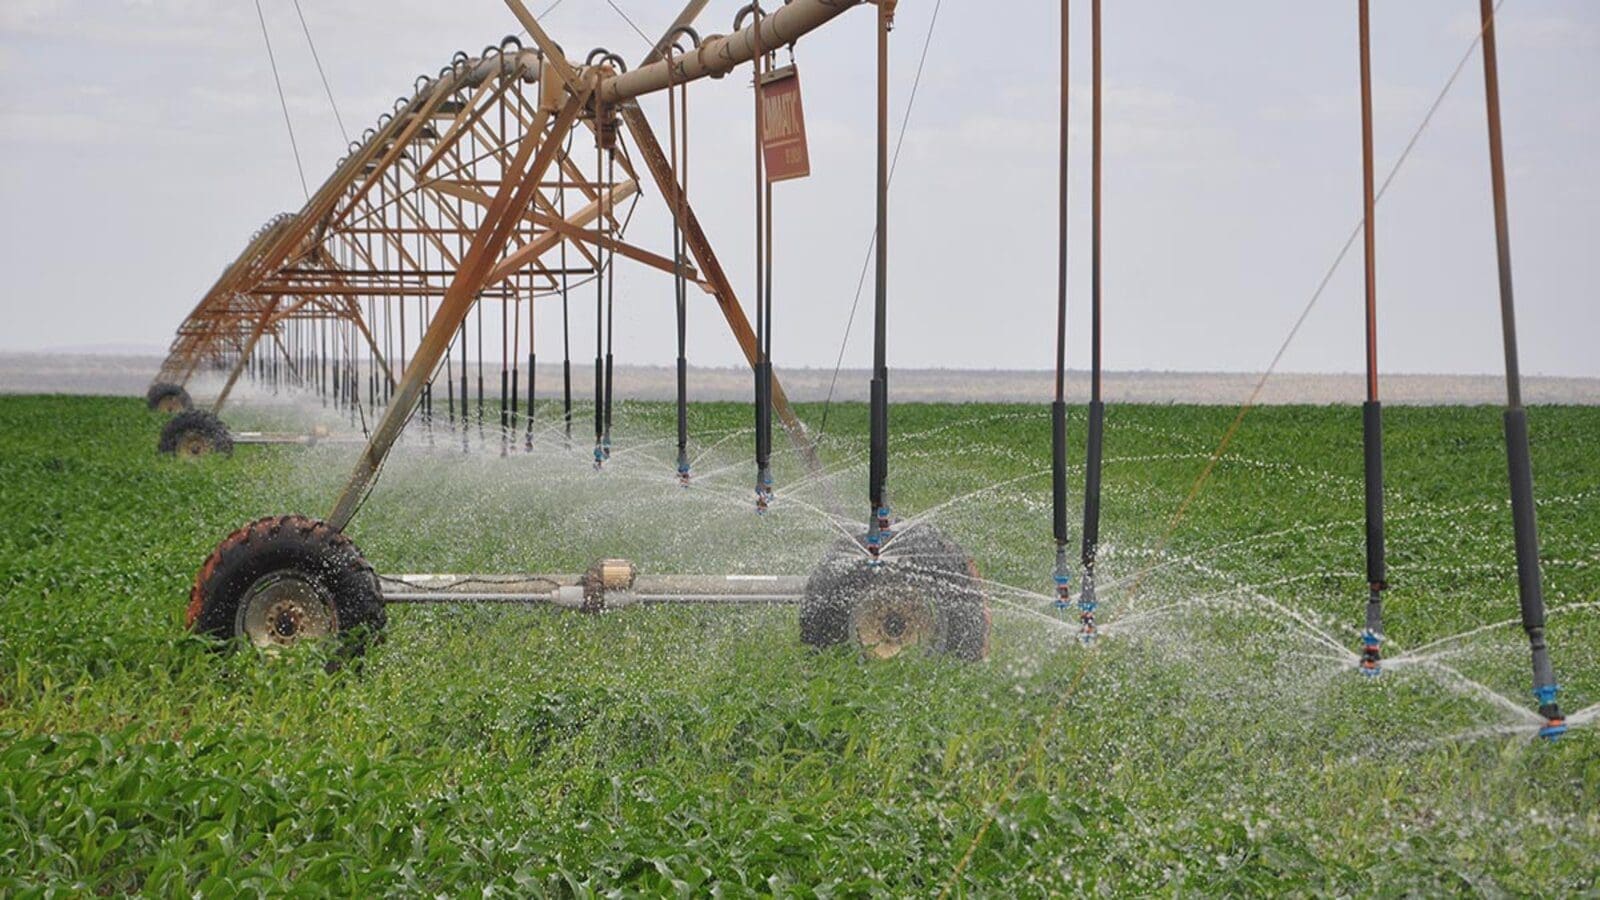 Kenya to invest US$412M on irrigation projects to boost food production, halt imports